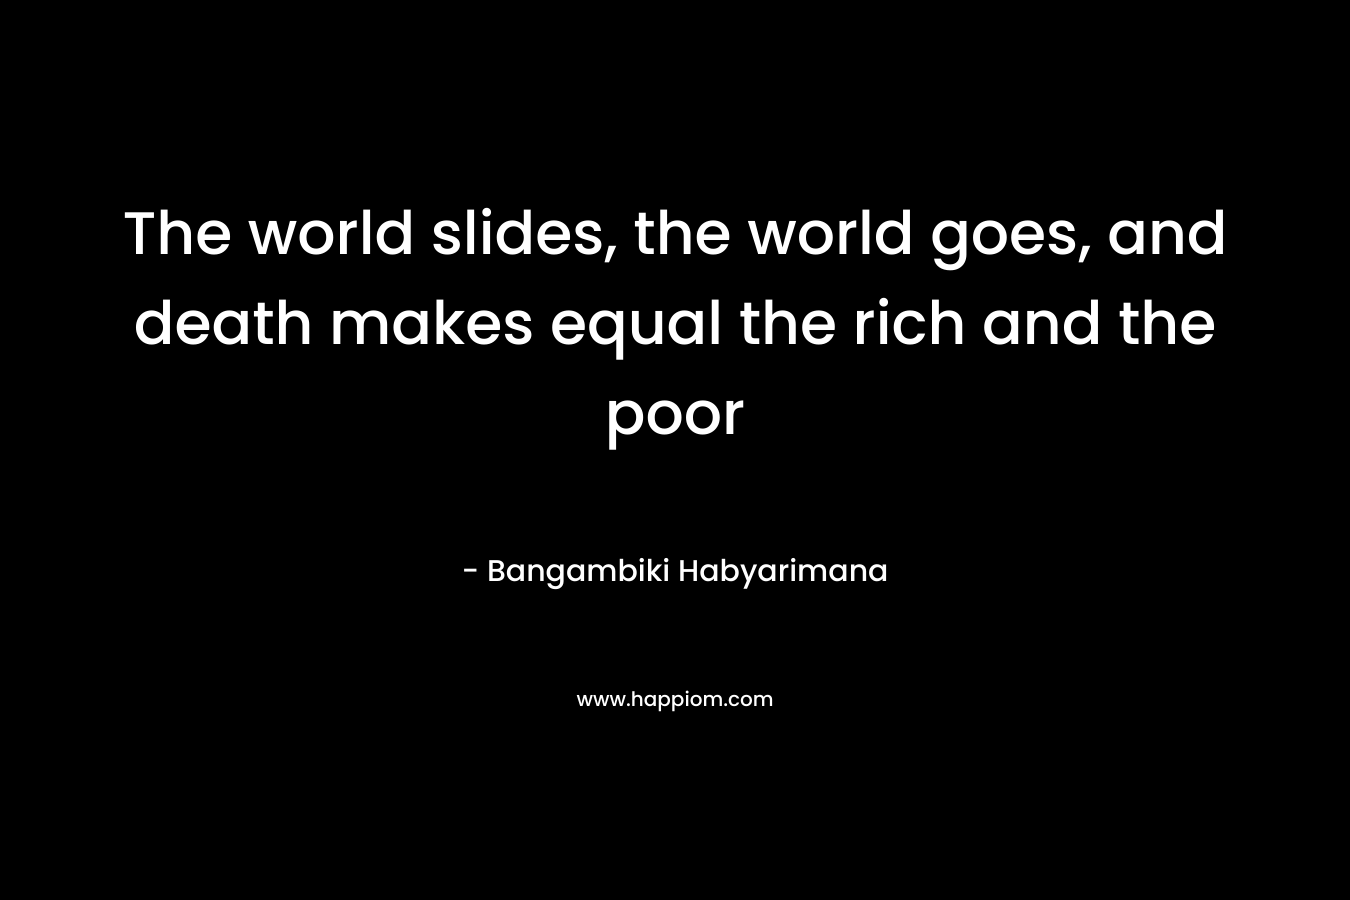 The world slides, the world goes, and death makes equal the rich and the poor – Bangambiki Habyarimana